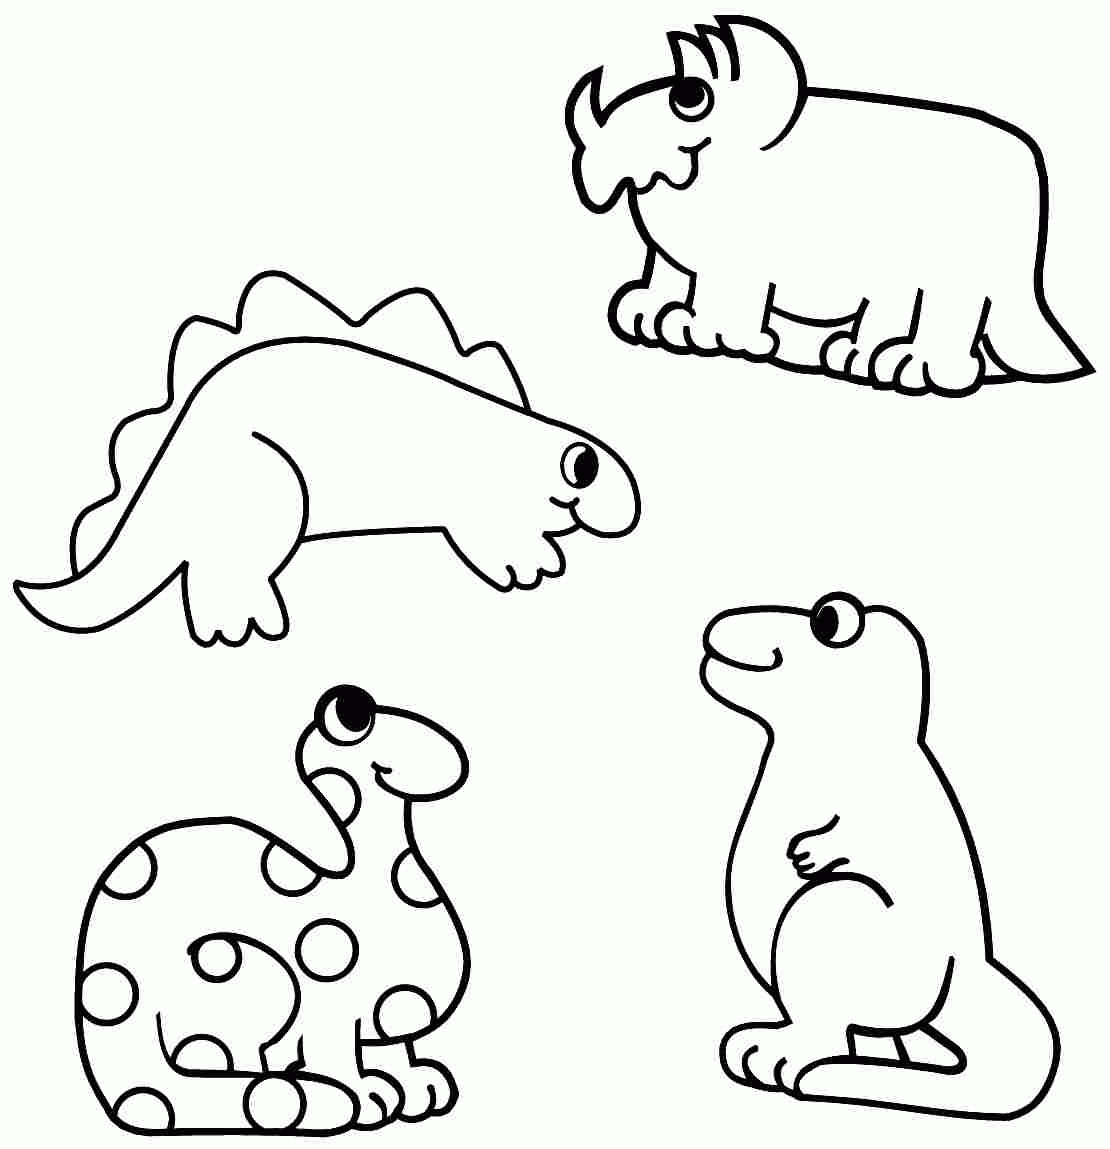 Dinosaur Coloring Pages For Preschoolers   Coloring Home